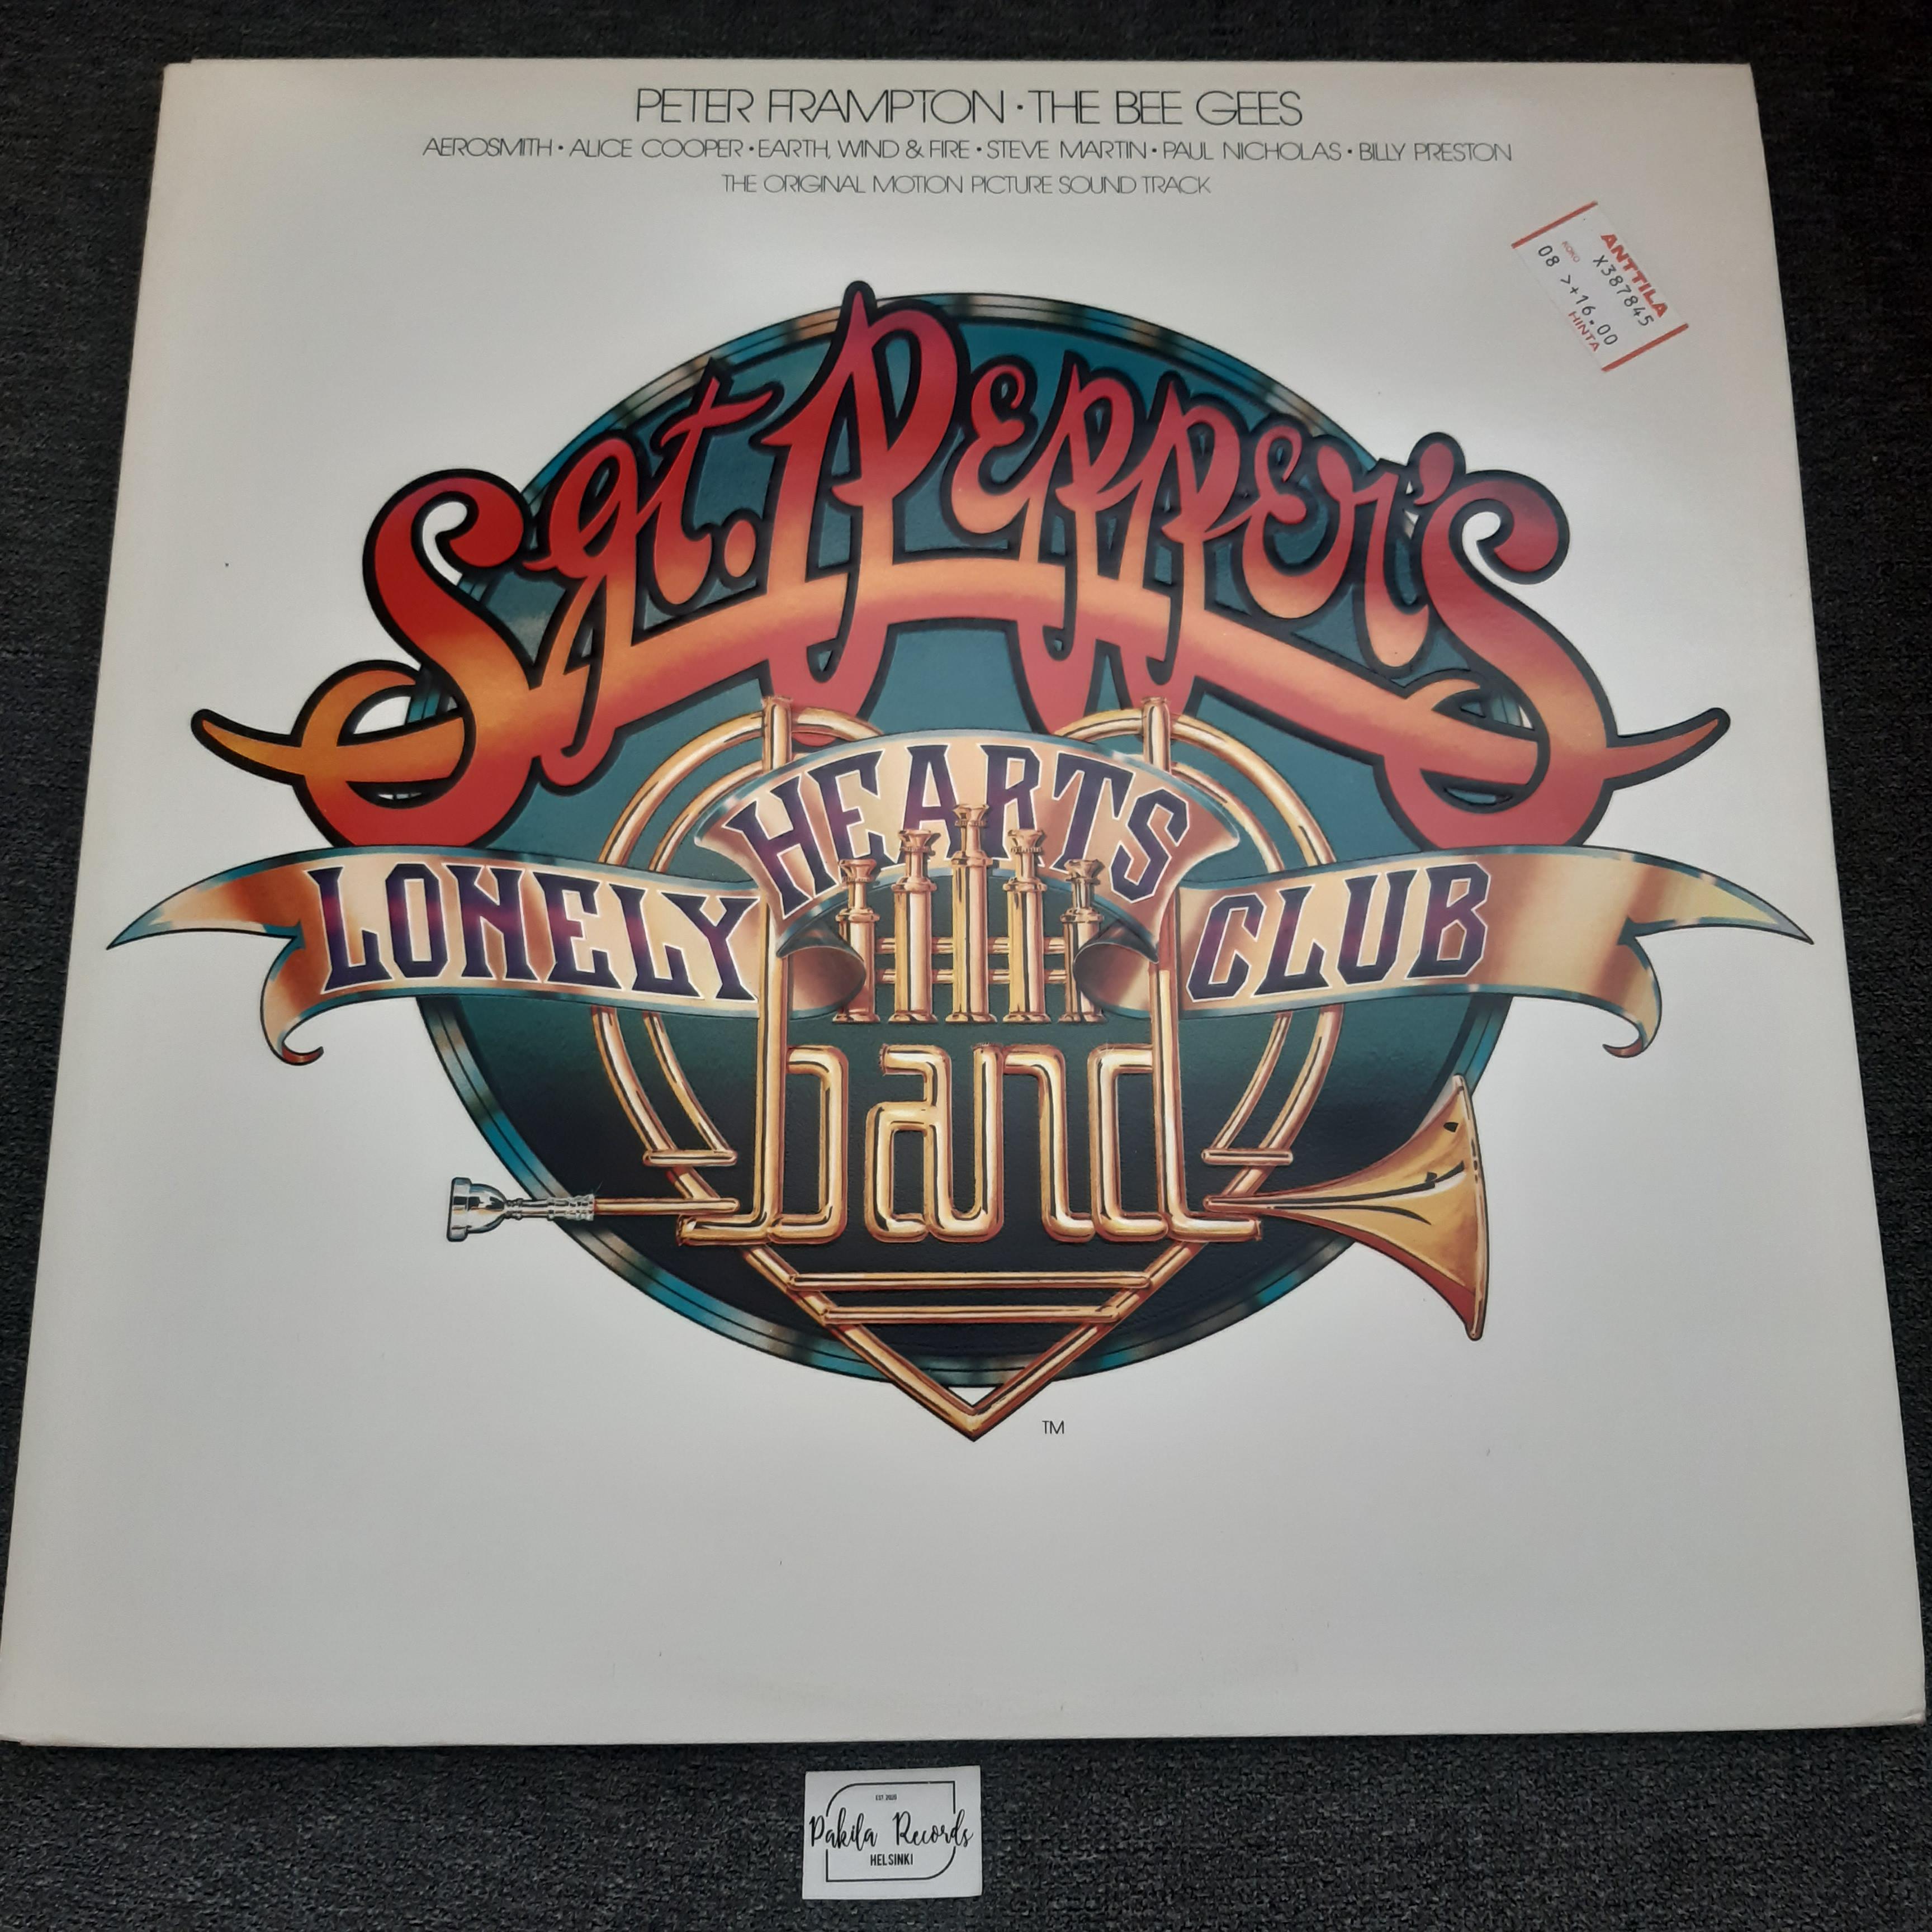 Sgt. Pepper's Lonely Hearts Club Band - 2 LP (käytetty)